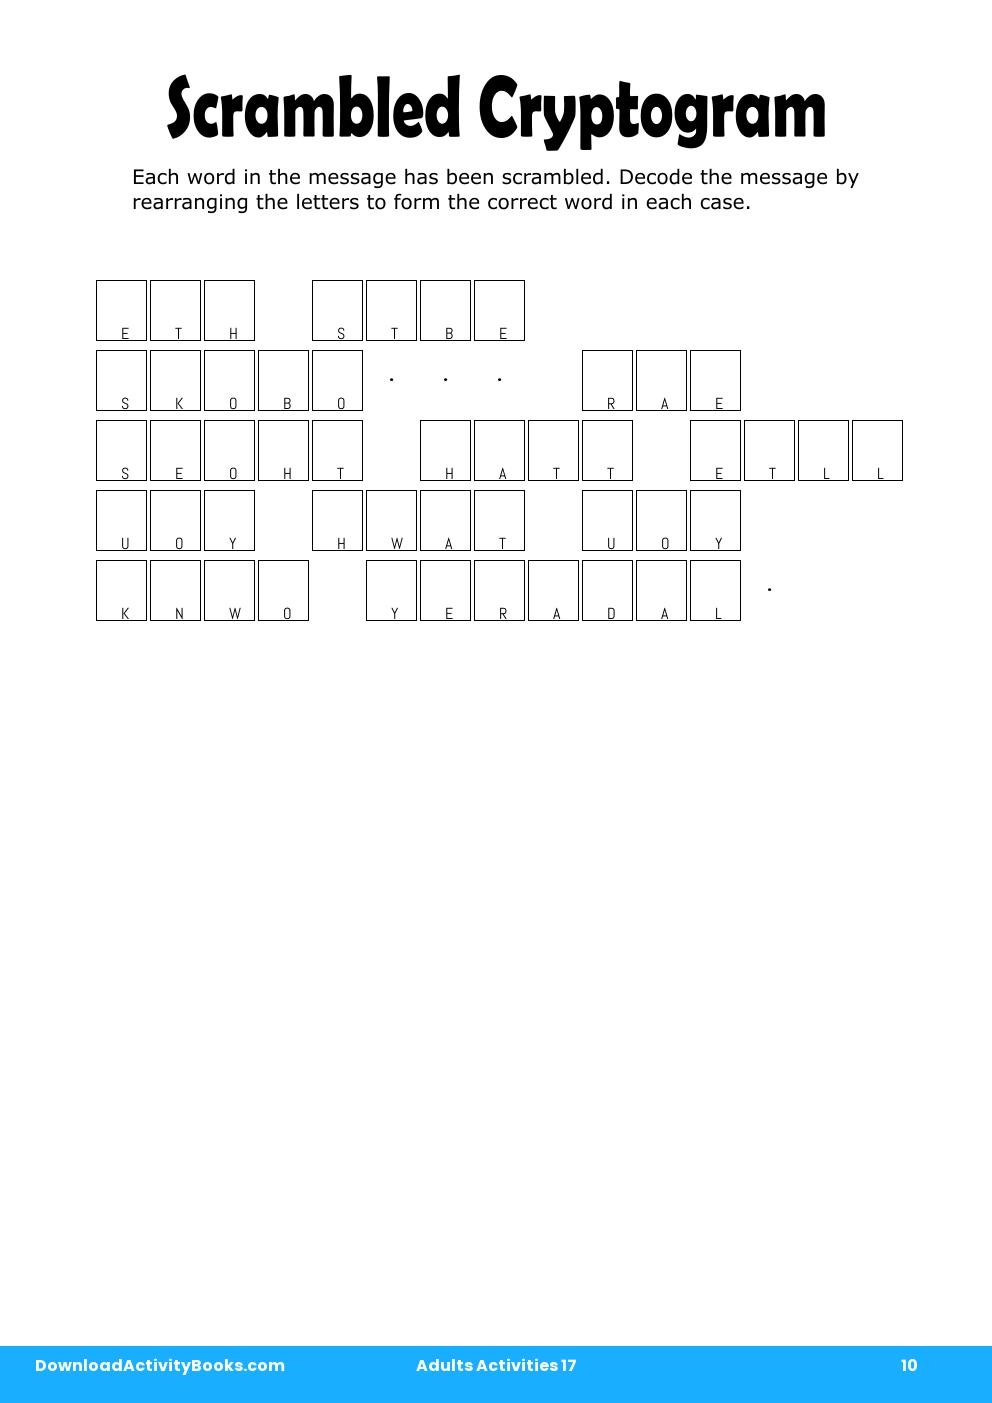 Scrambled Cryptogram in Adults Activities 17